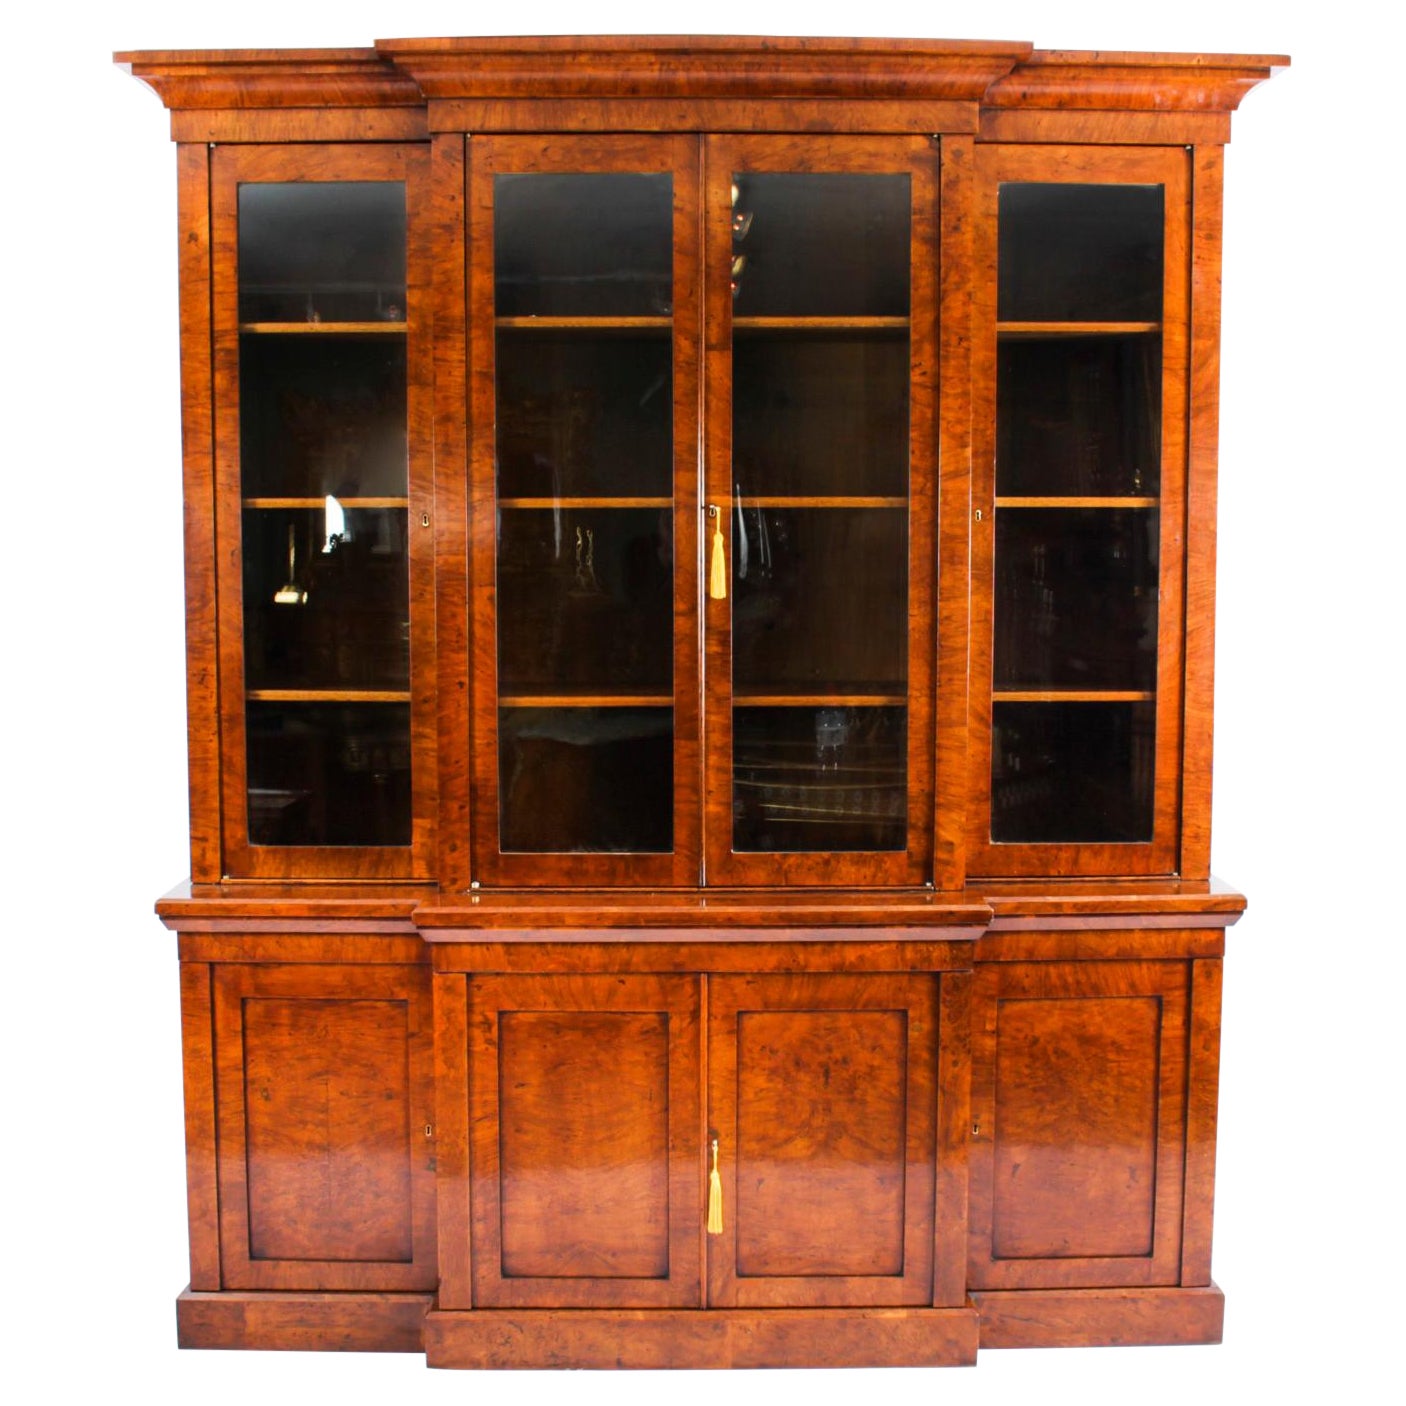 Antique English Pollard Oak Library Breakfront Bookcase Early 19th C